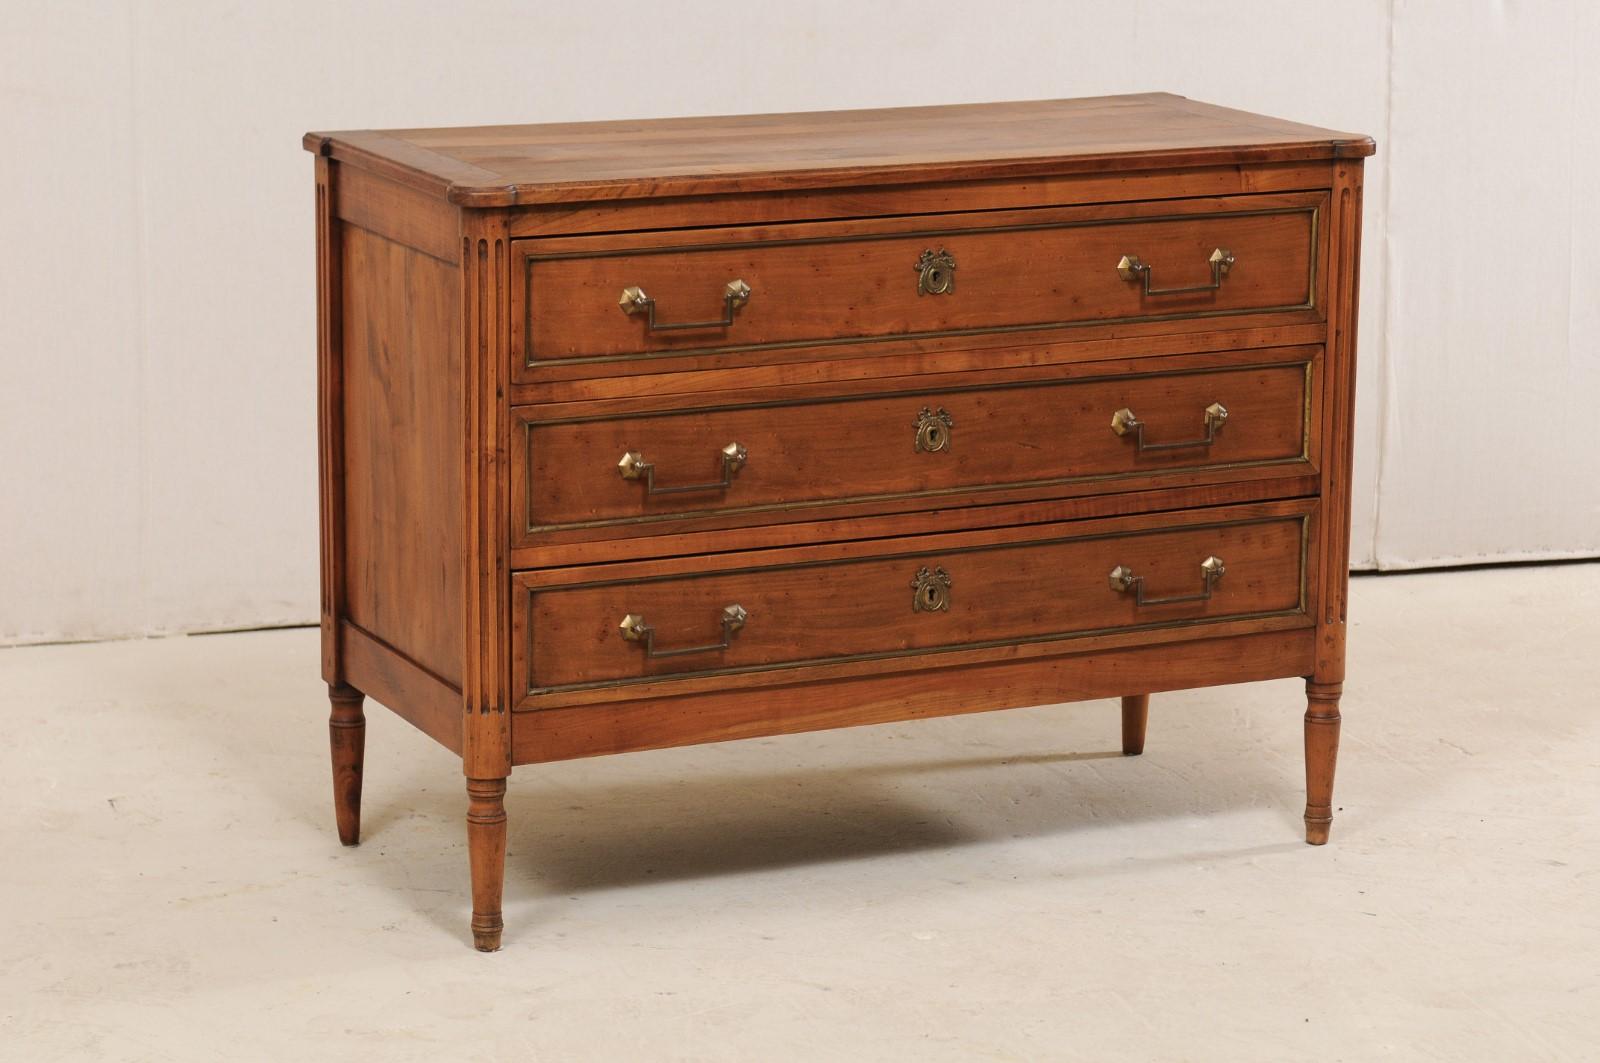 A French chest of three drawers with fluted details and brass trim from the early to mid 20th century. This beautiful fruit-wood commode from France, designed in Louis XVI style, features a slightly overhanging top with rounded, pronounced